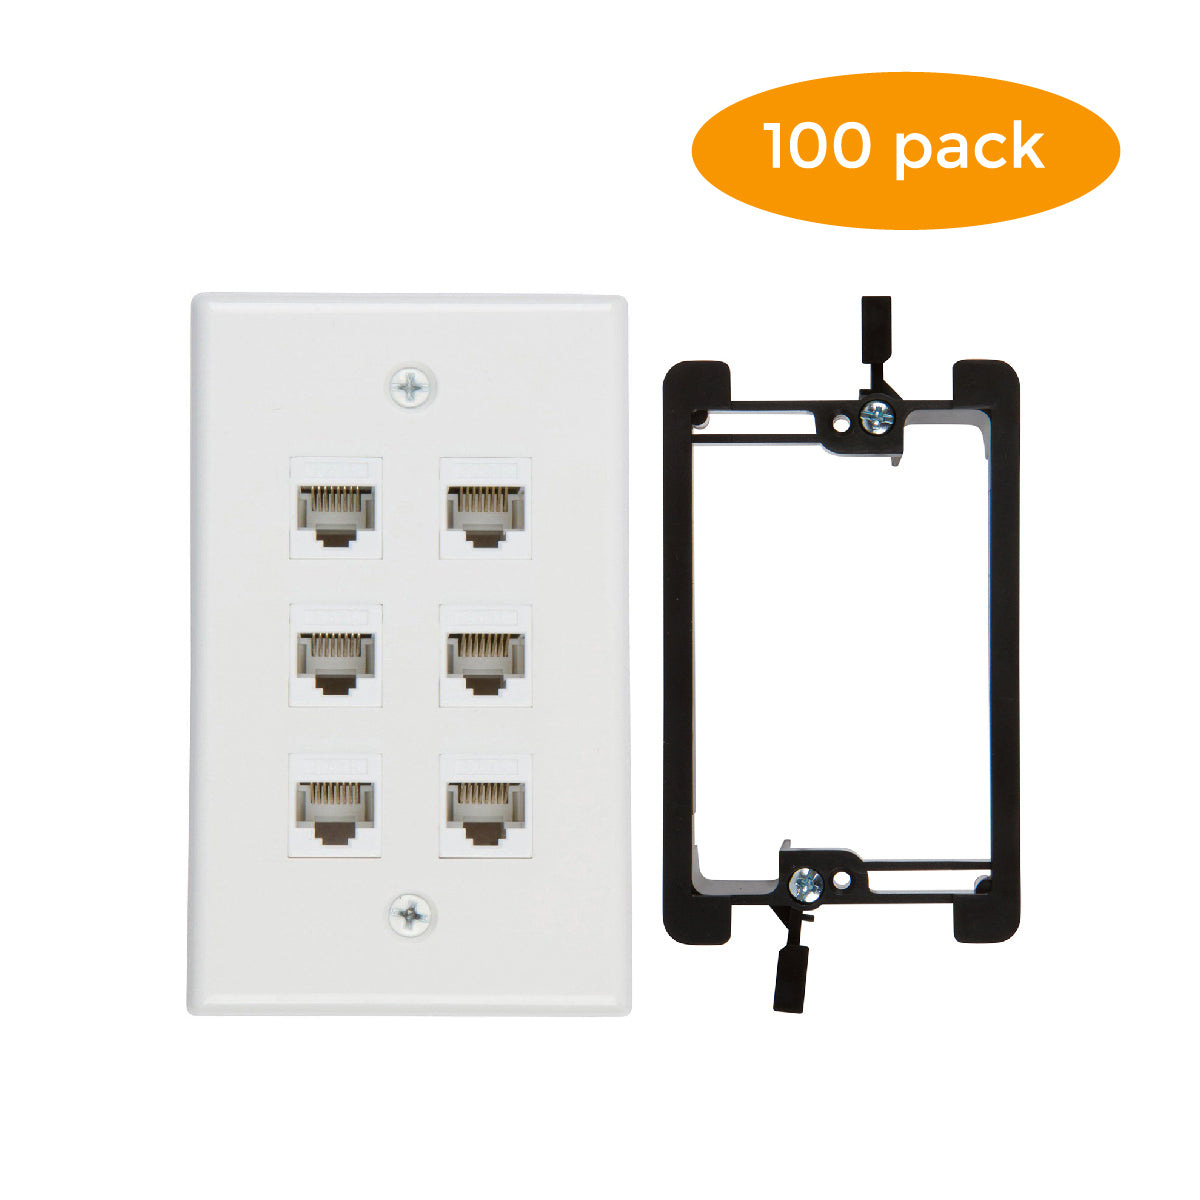 6 Port Cat6 Wall Plate, Female-Female White with Single Gang Low Voltage Mounting Bracket Device (6 Port) - Milena International Inc